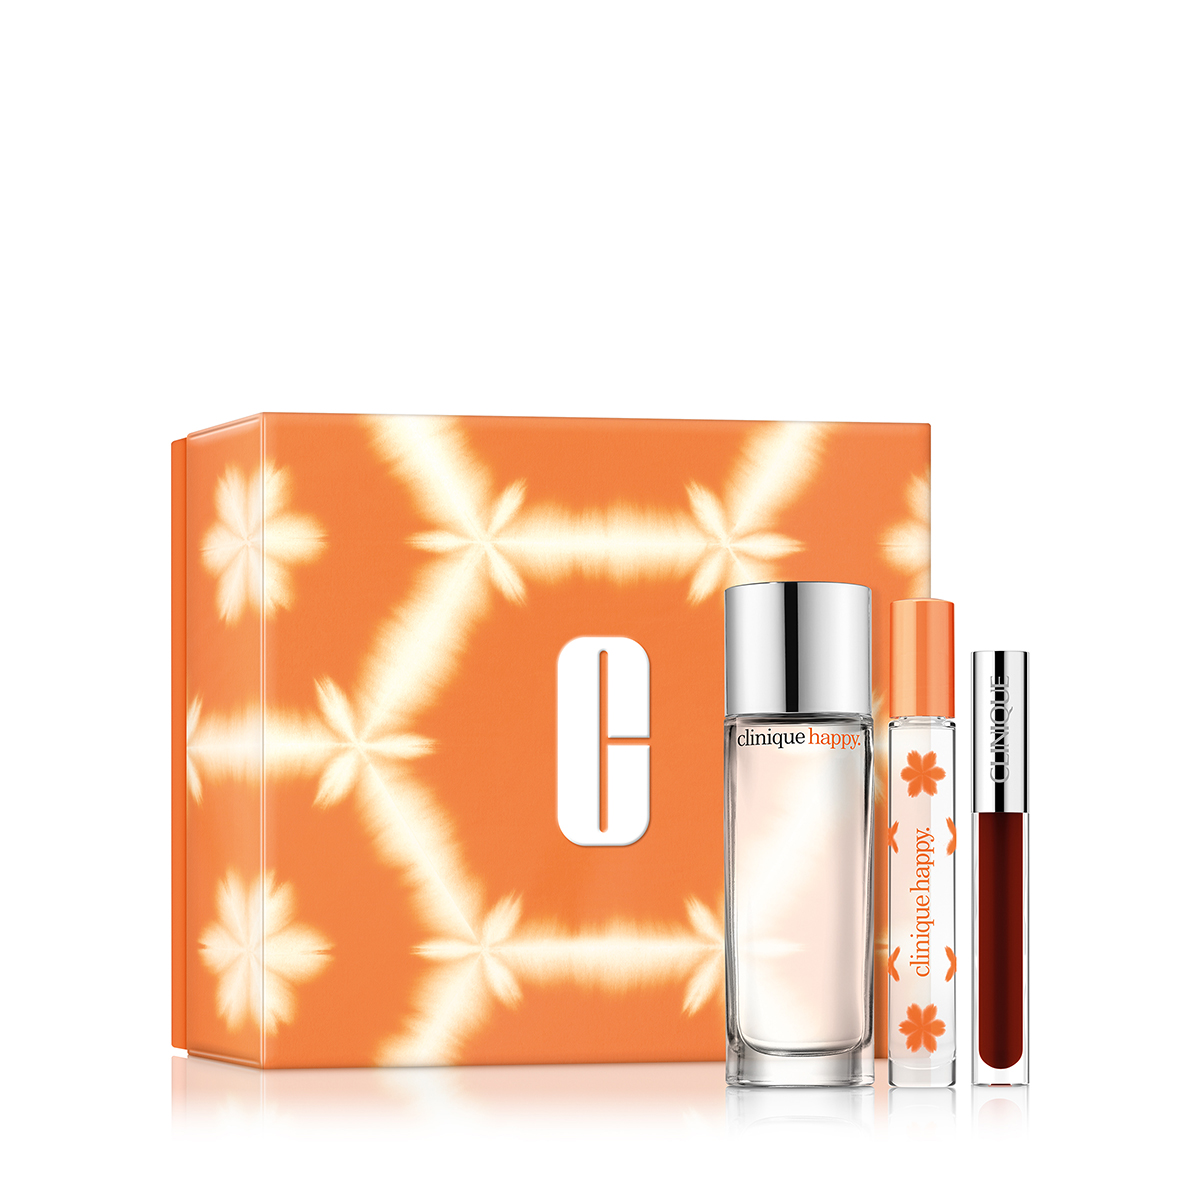 Open Video Modal for Clinique Perfectly Happy Fragrance + Lip Gloss Set - $125 Value